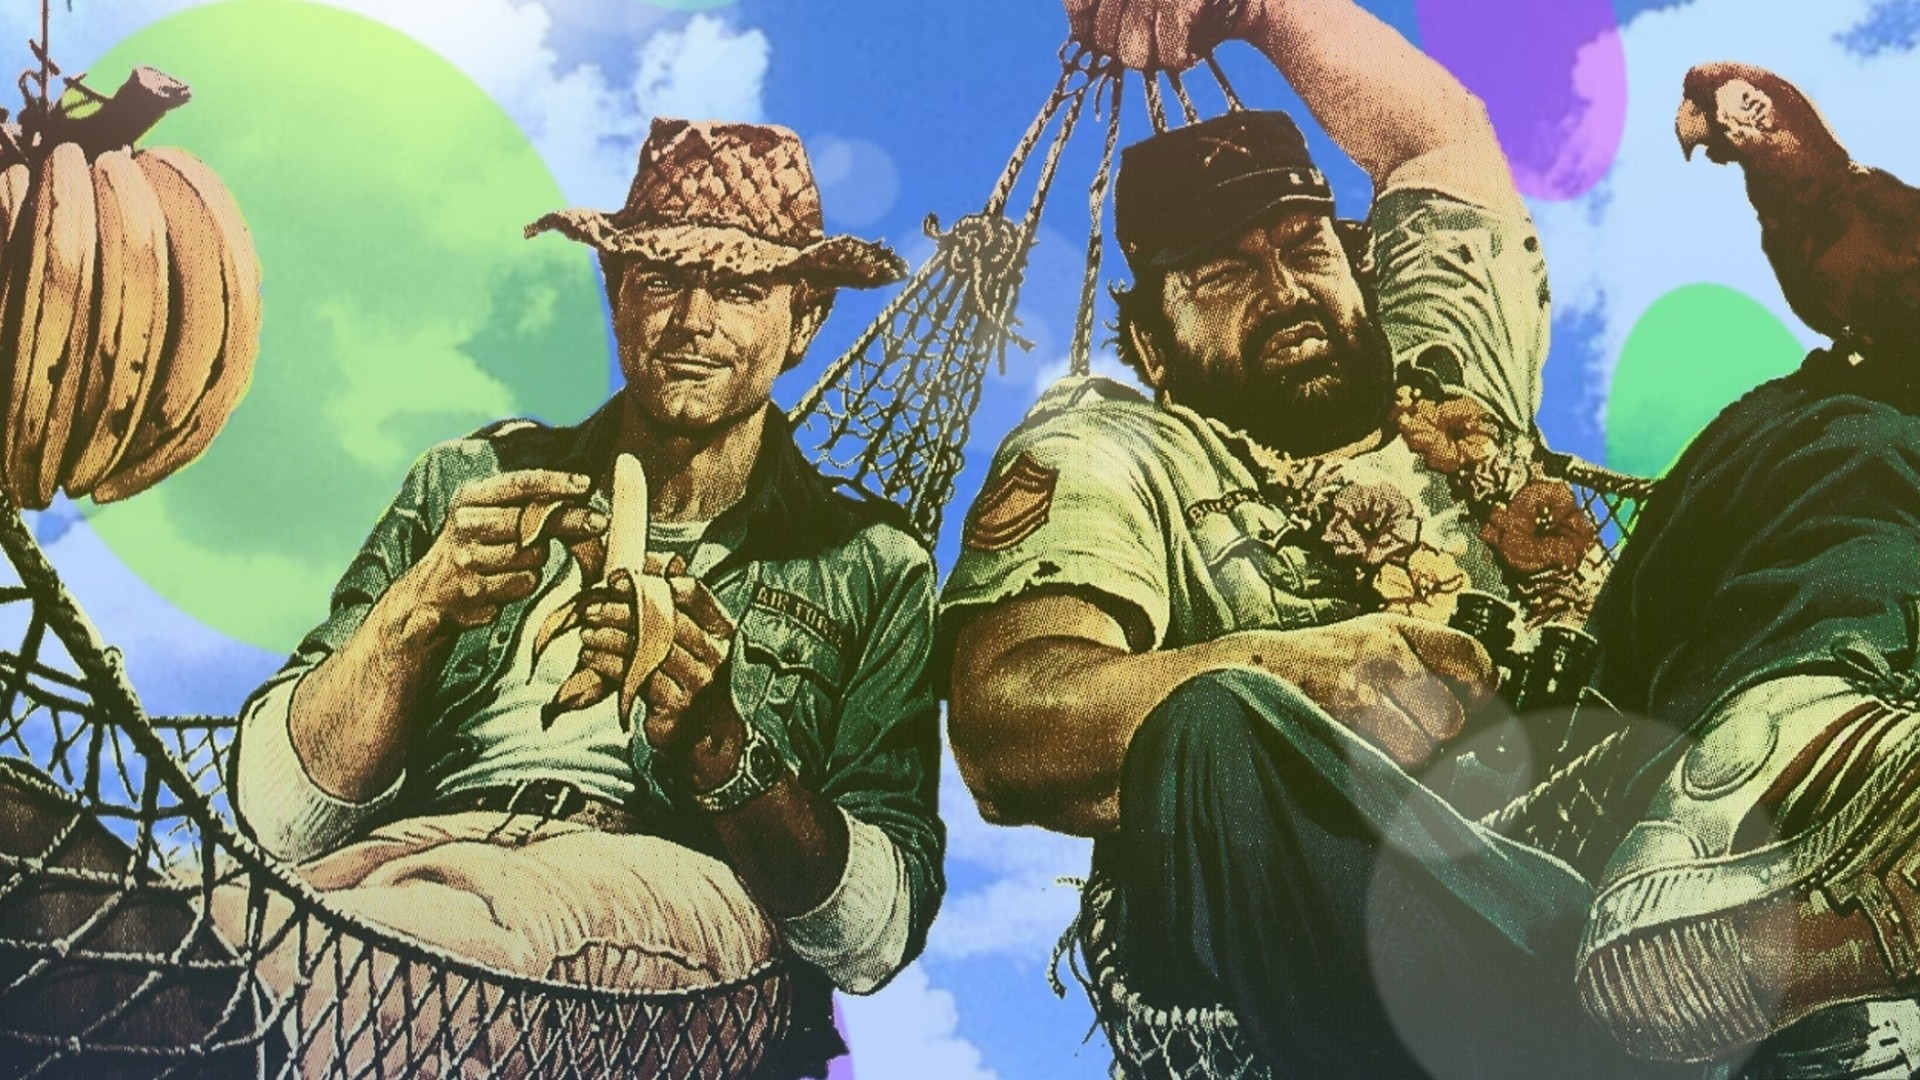 General 1920x1080 movies Terence Hill Bud Spencer hat bananas